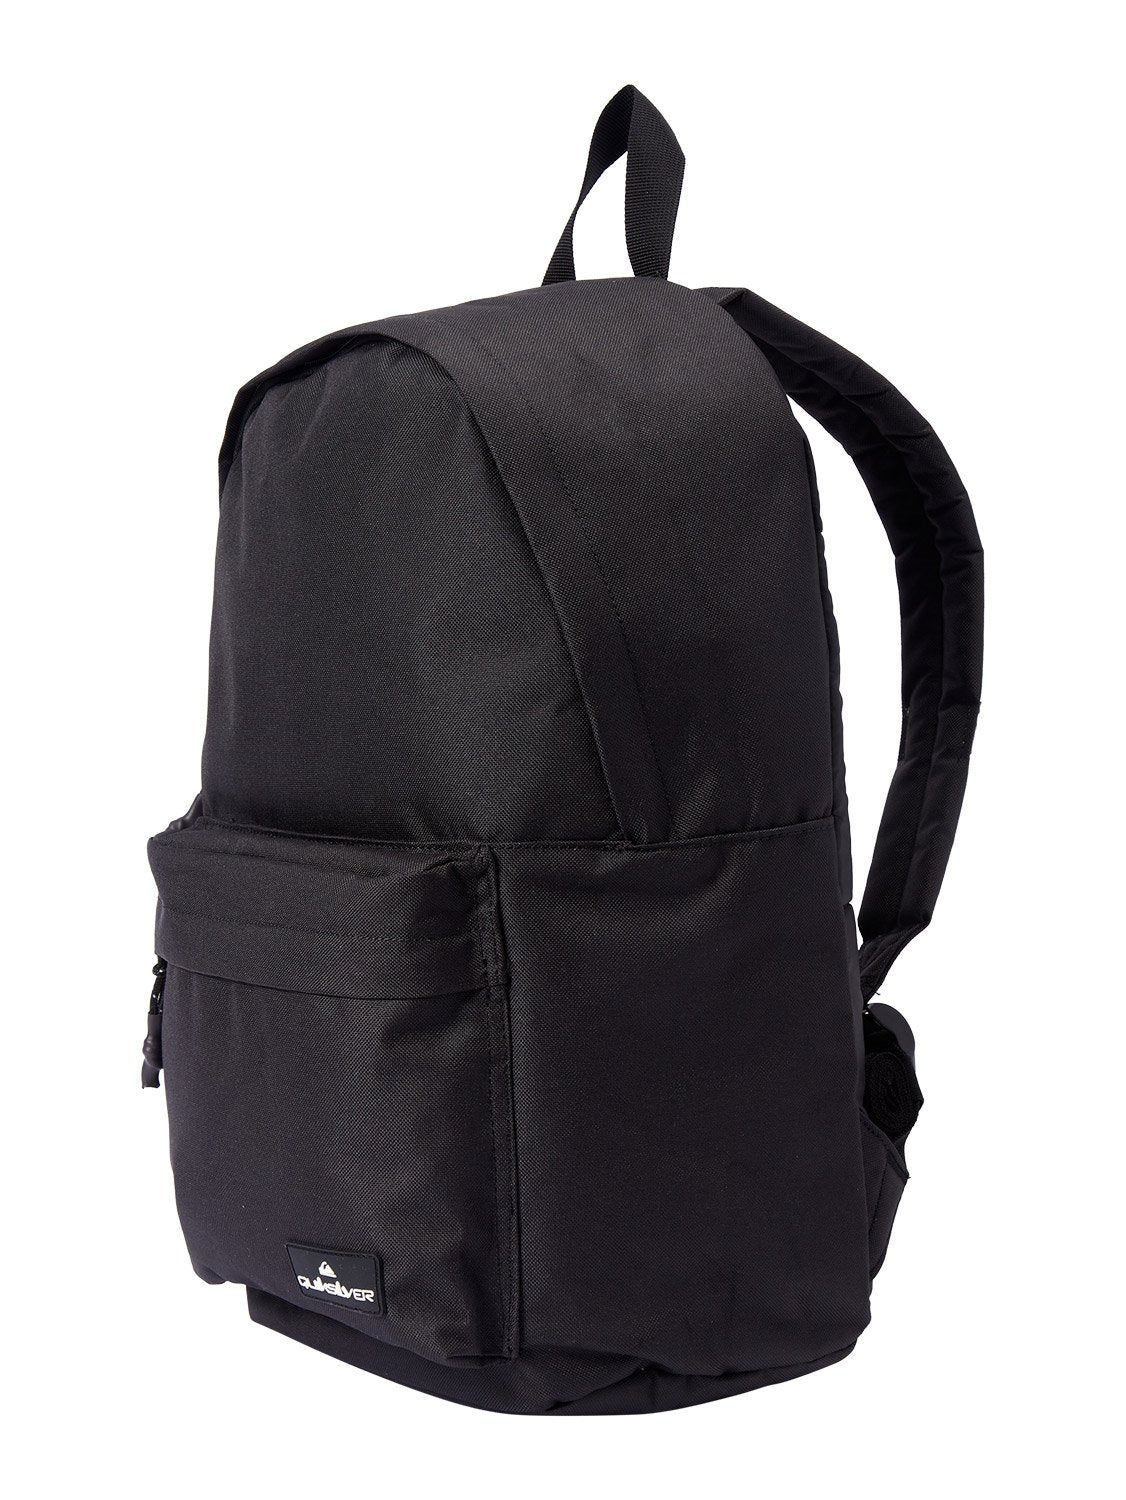 Quiksilver Mens the Poster Backpack